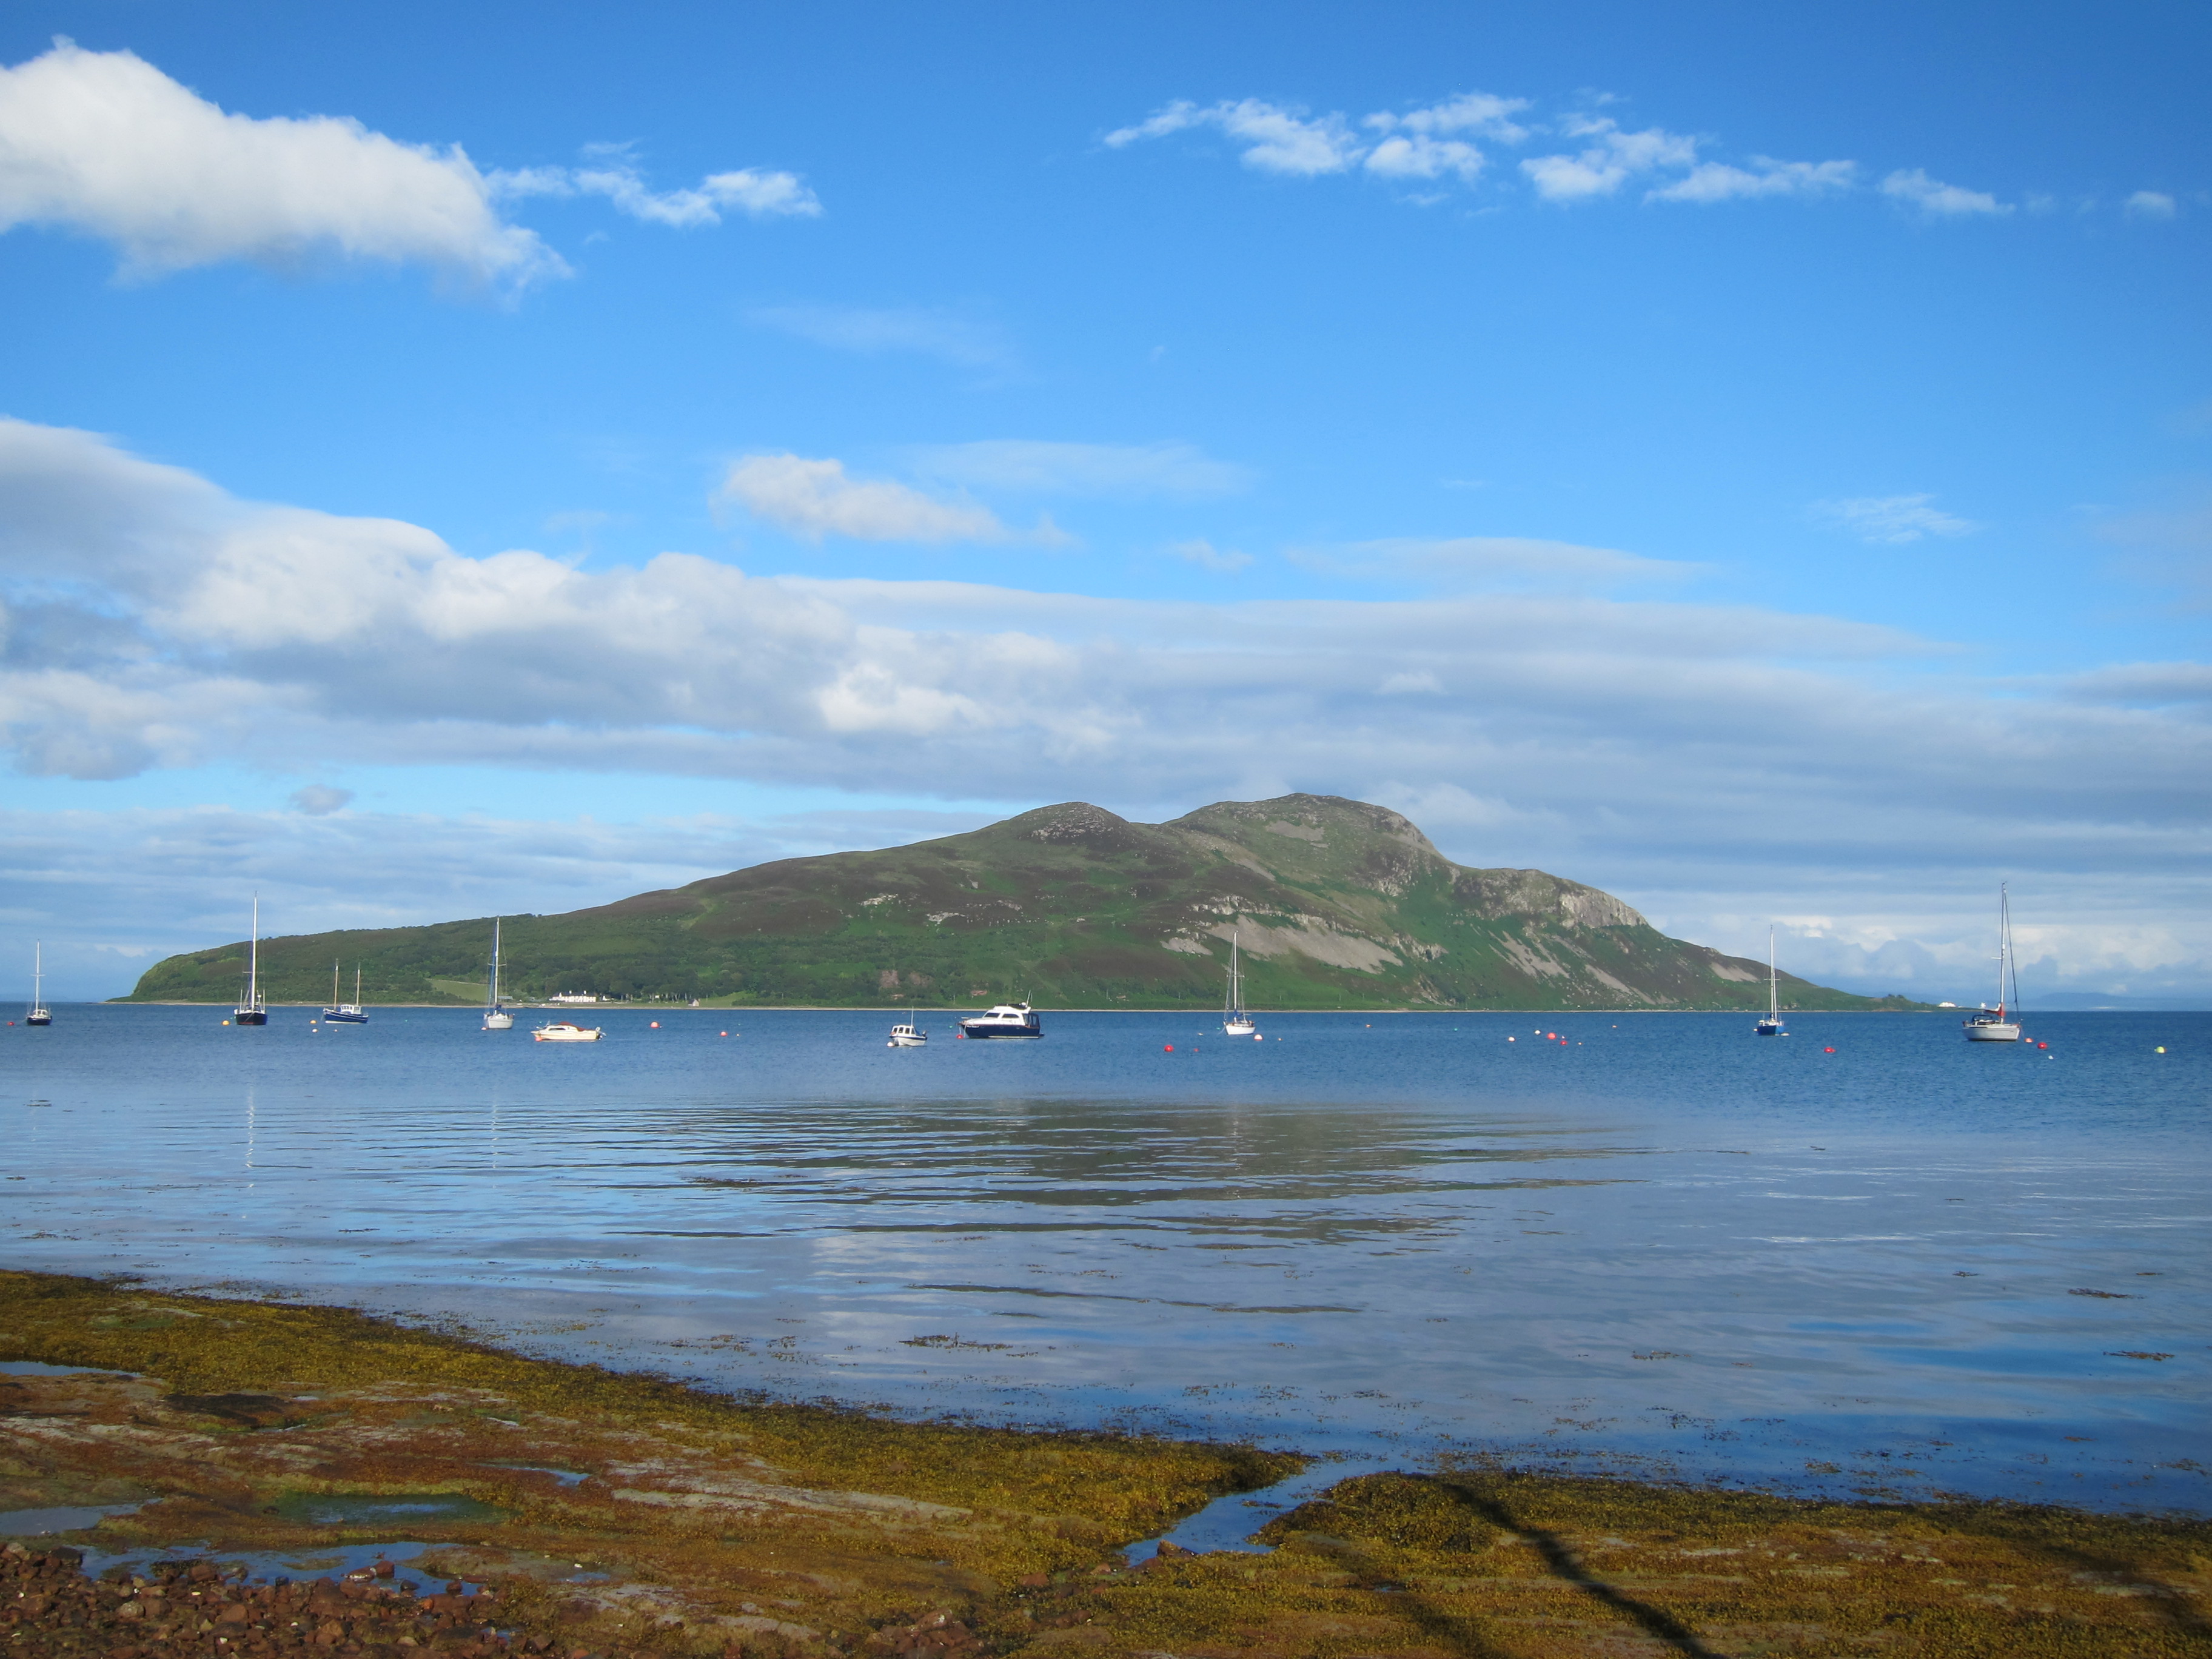 Image: Lamlash Bay marine reserve with Holy Island in the background (credit: Bryce Stewart)